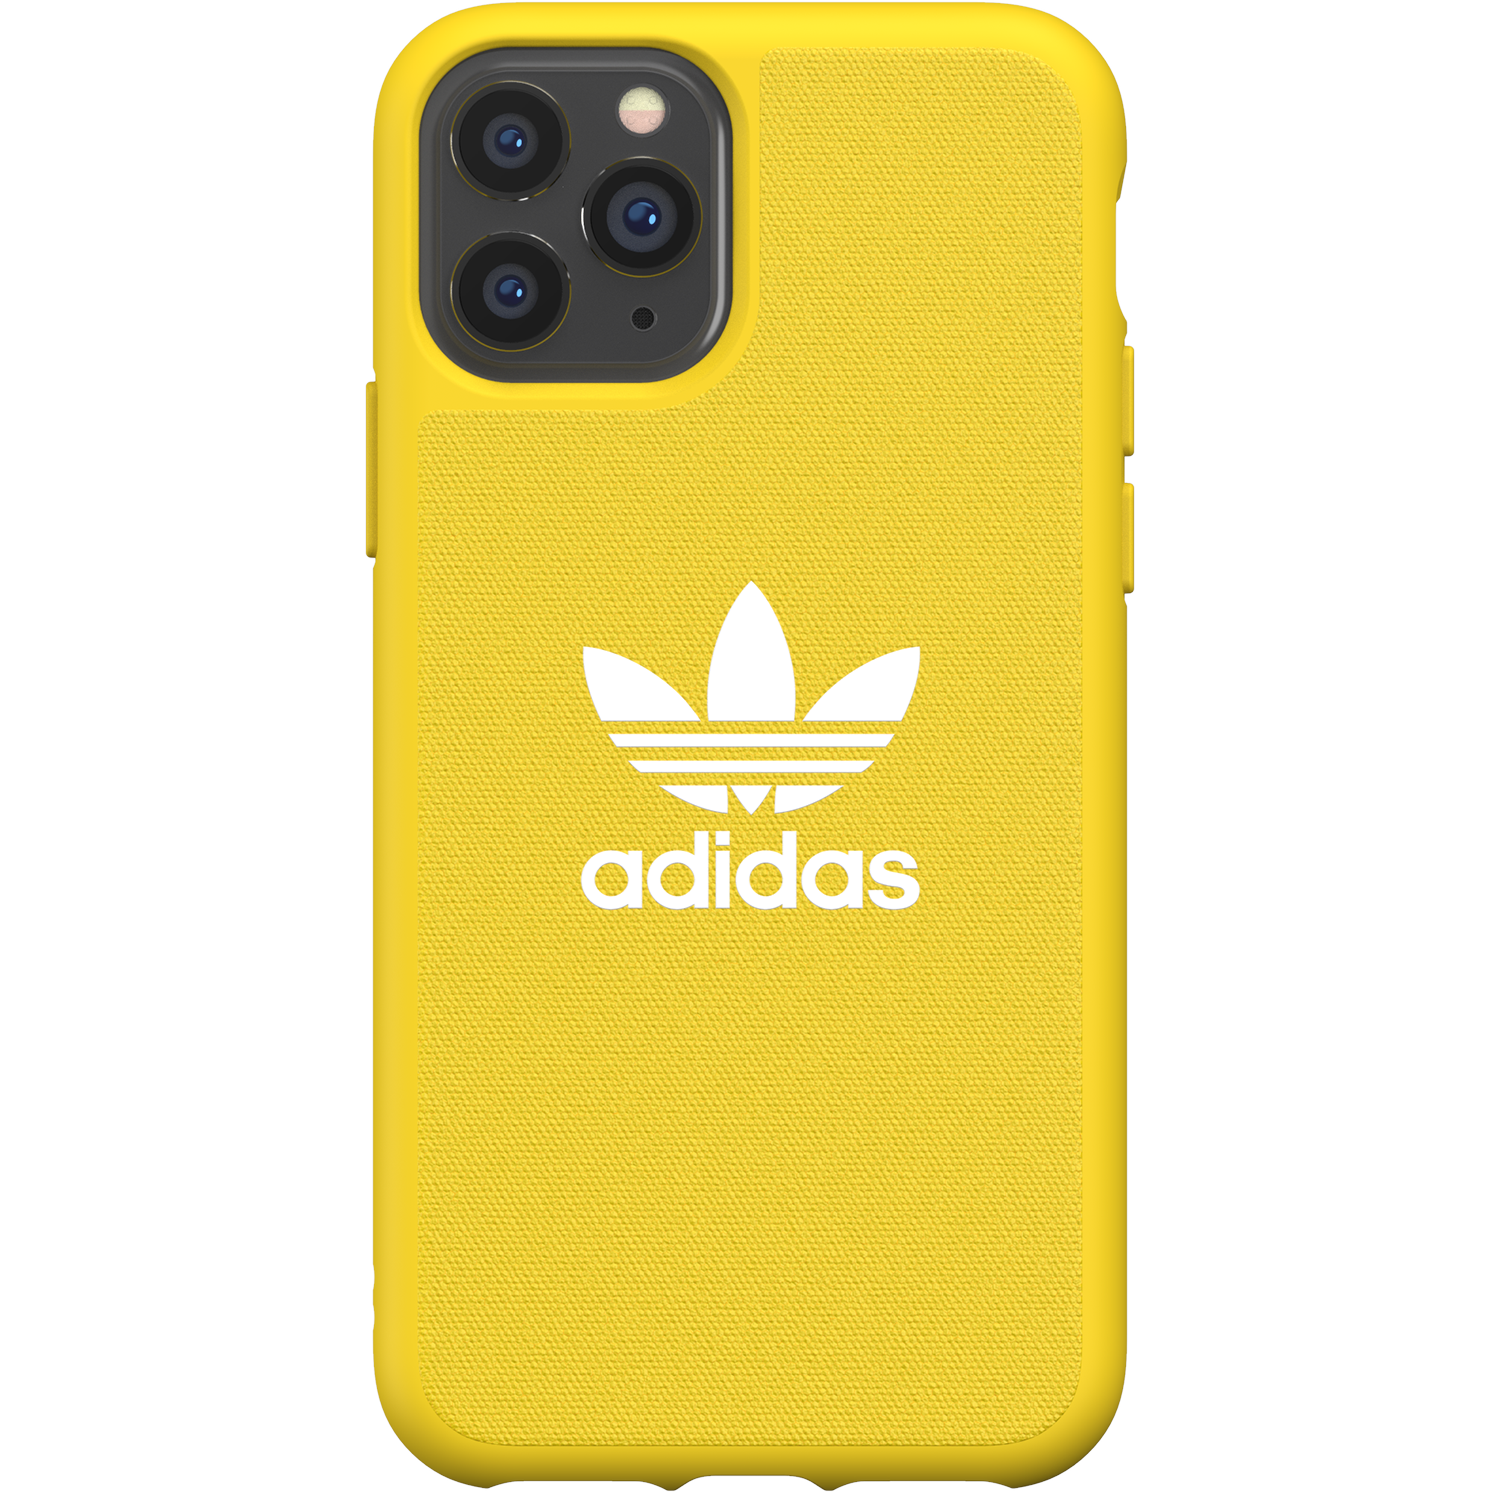 Adidas adidas OR Moulded Case CANVAS FW19/SS20 for iPhone 11 Pro yellow